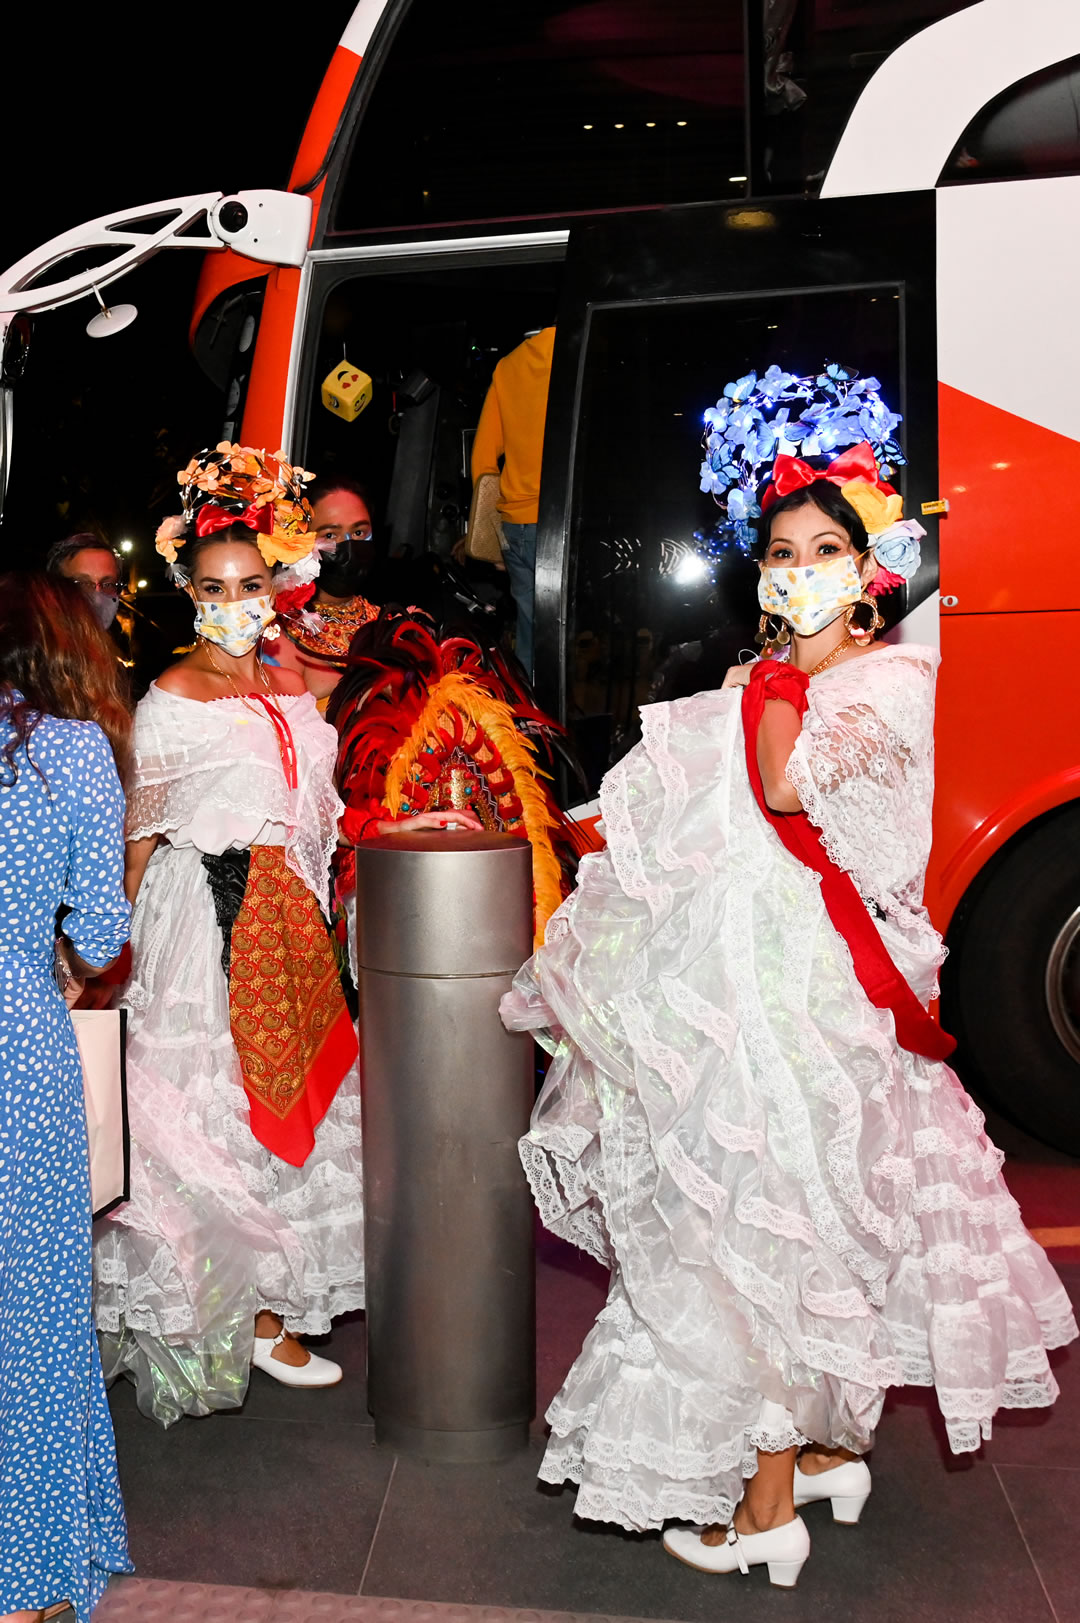 Performers Board The Shuttle Bus